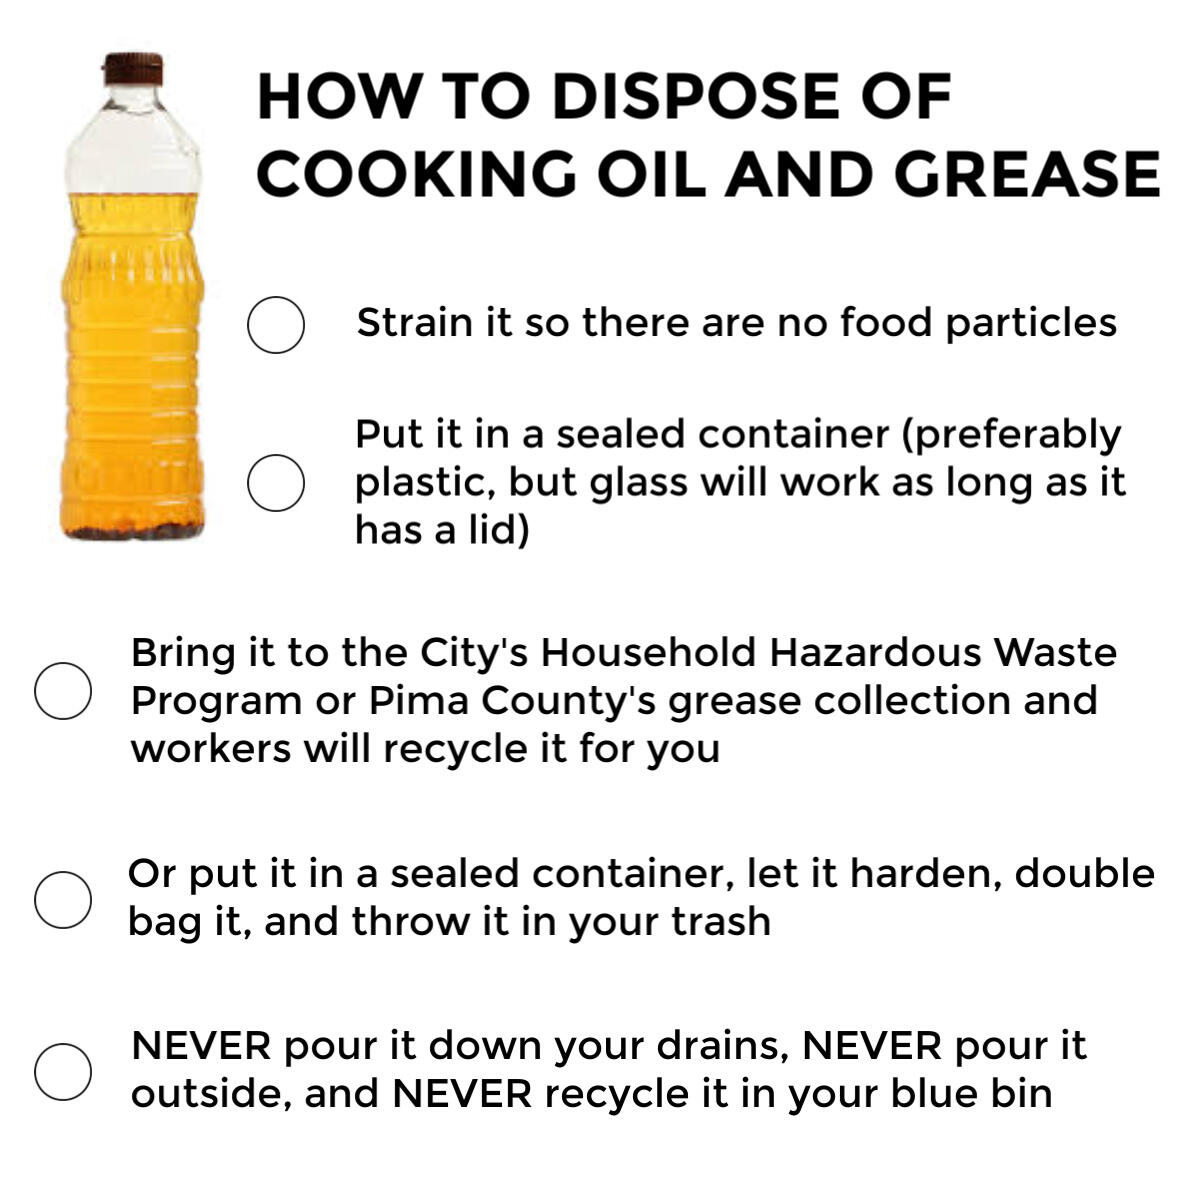 How to Dispose of Cooking Grease and Oil